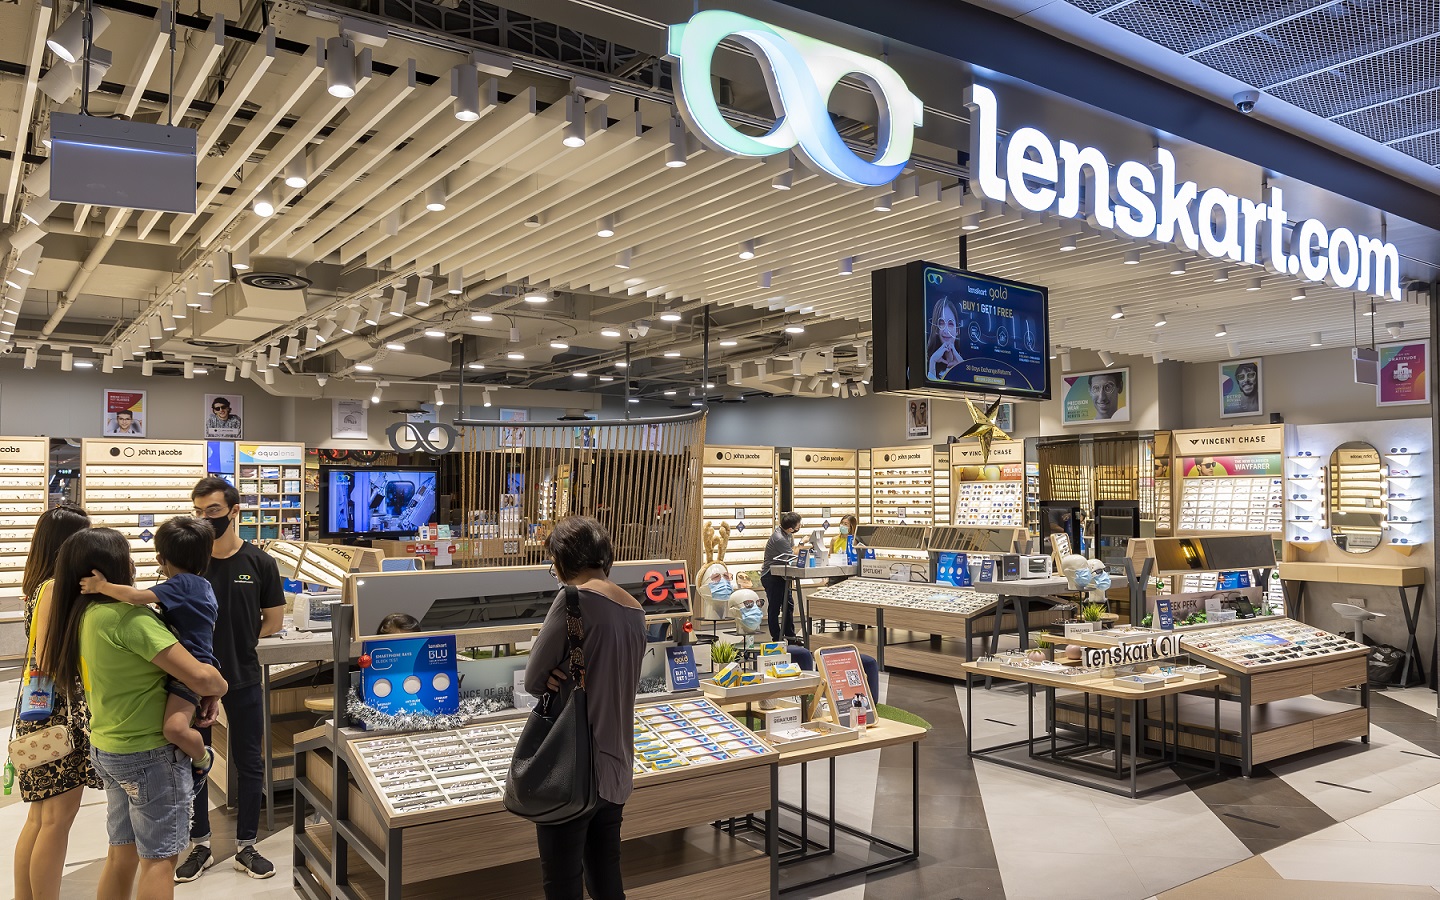 ASIA'S LARGEST EYEWEAR RETAILER LAUNCHES IN MIDDLE EAST